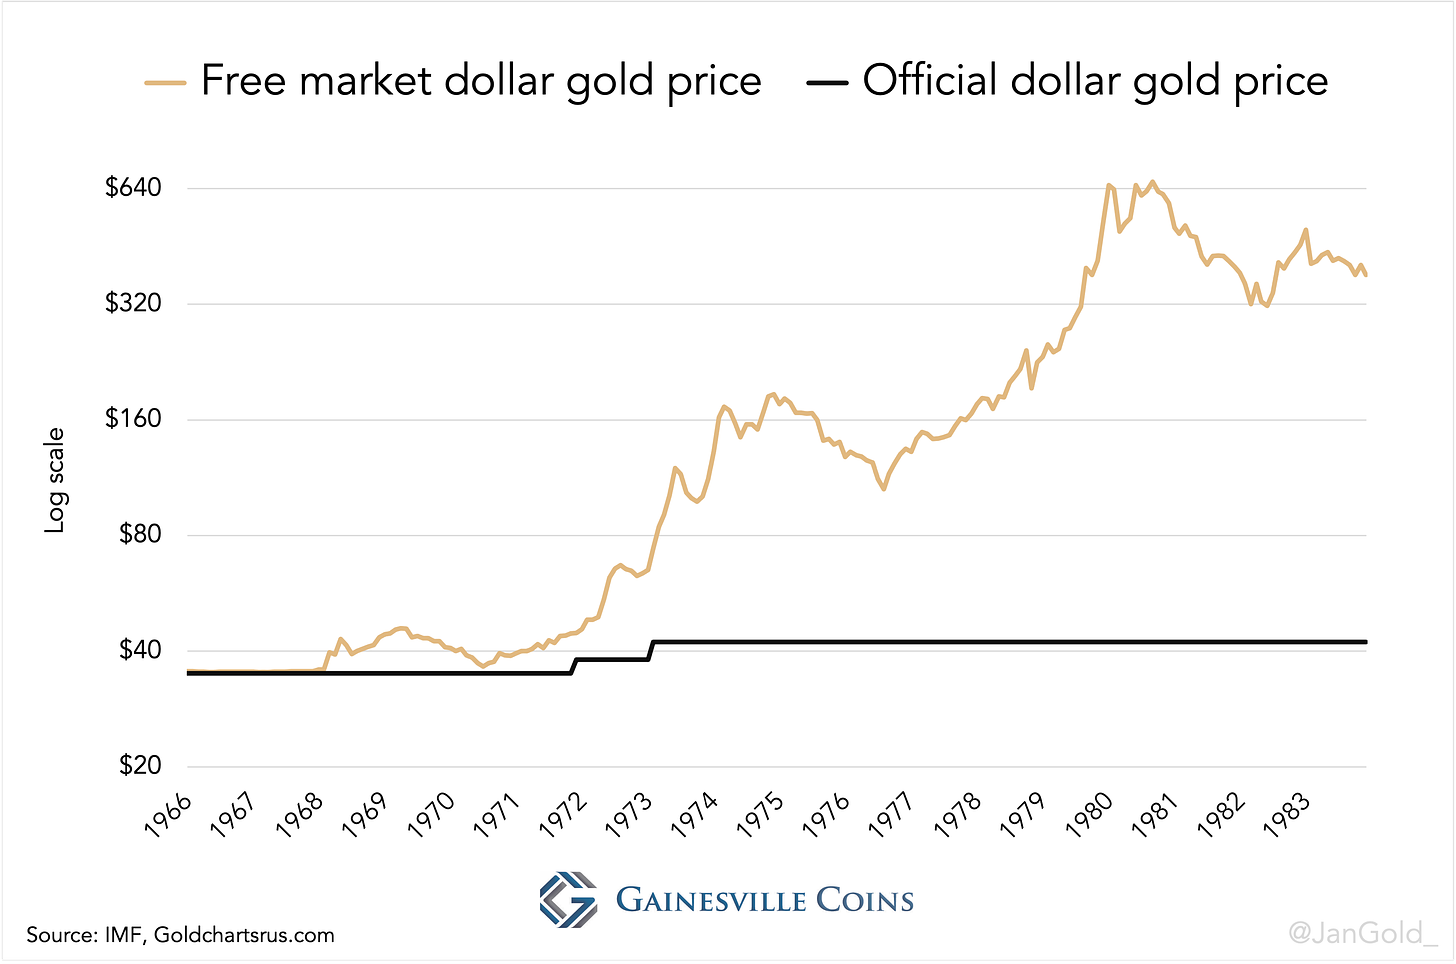 Free market and official gold prices 1970s